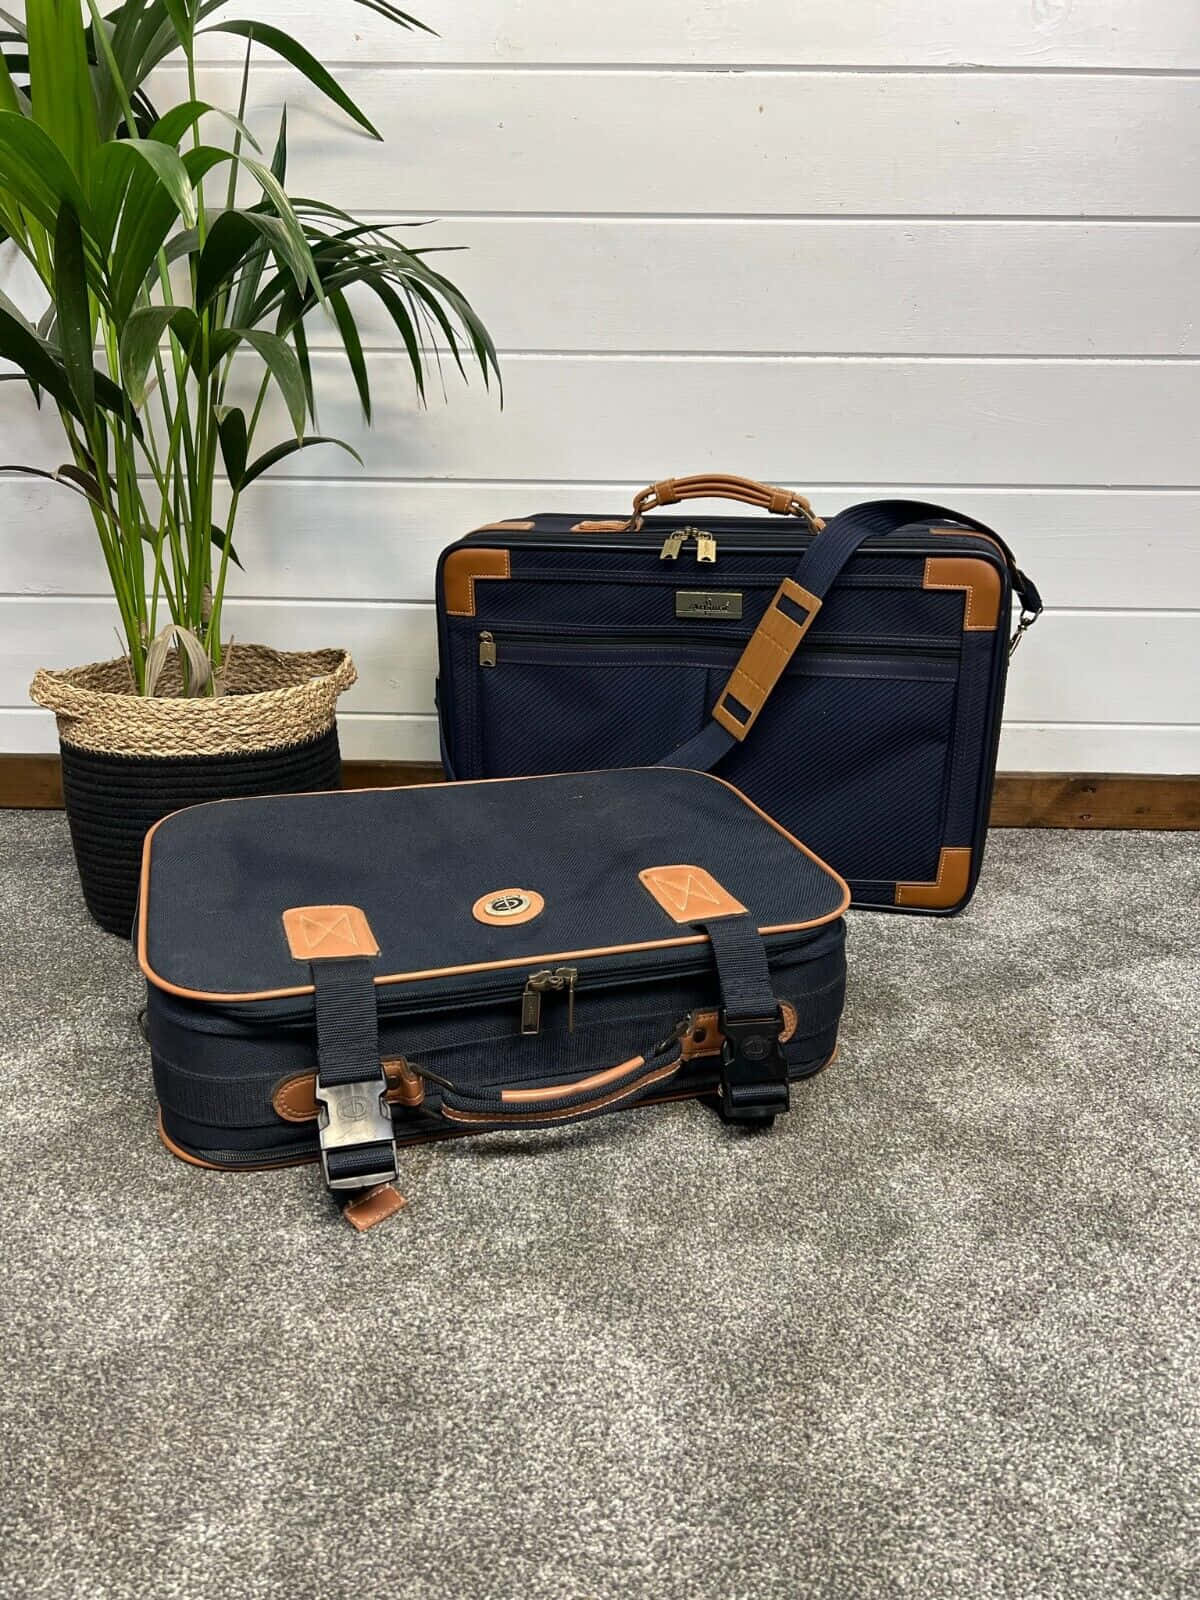 Vintage Luggage Set With Plant Wallpaper